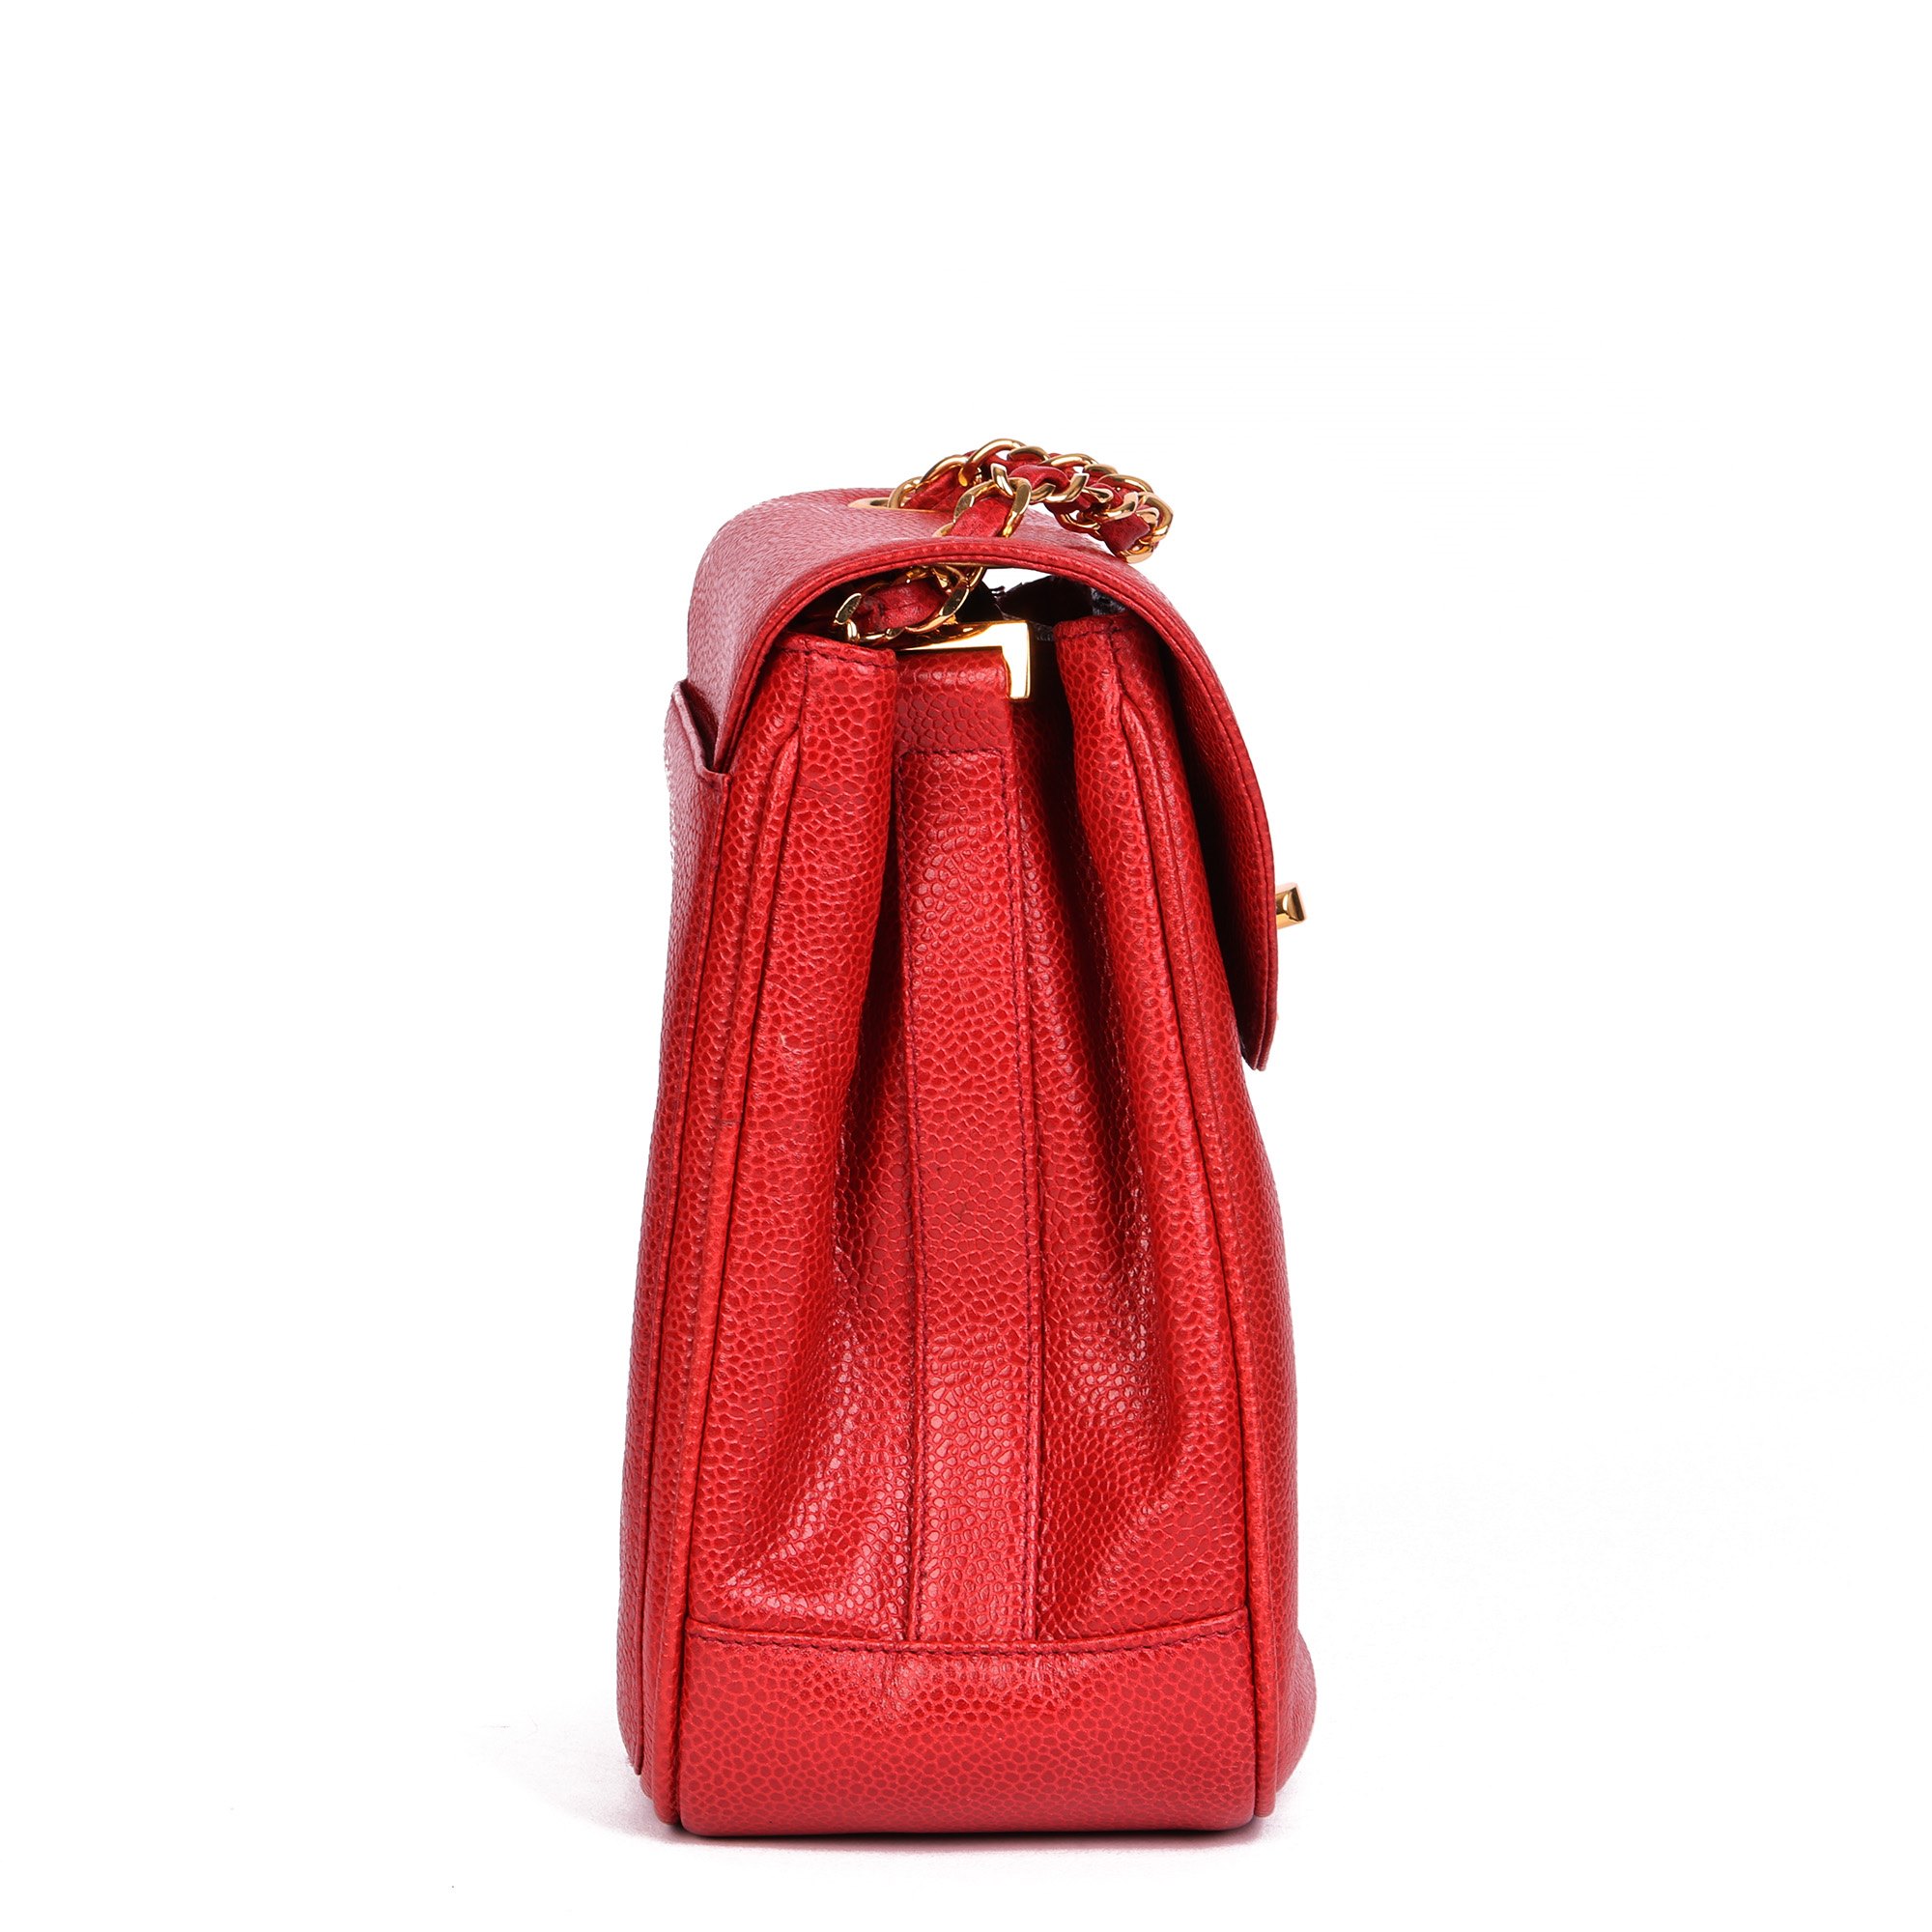 Chanel Red Caviar Leather Vintage XL Classic Single Flap Bag